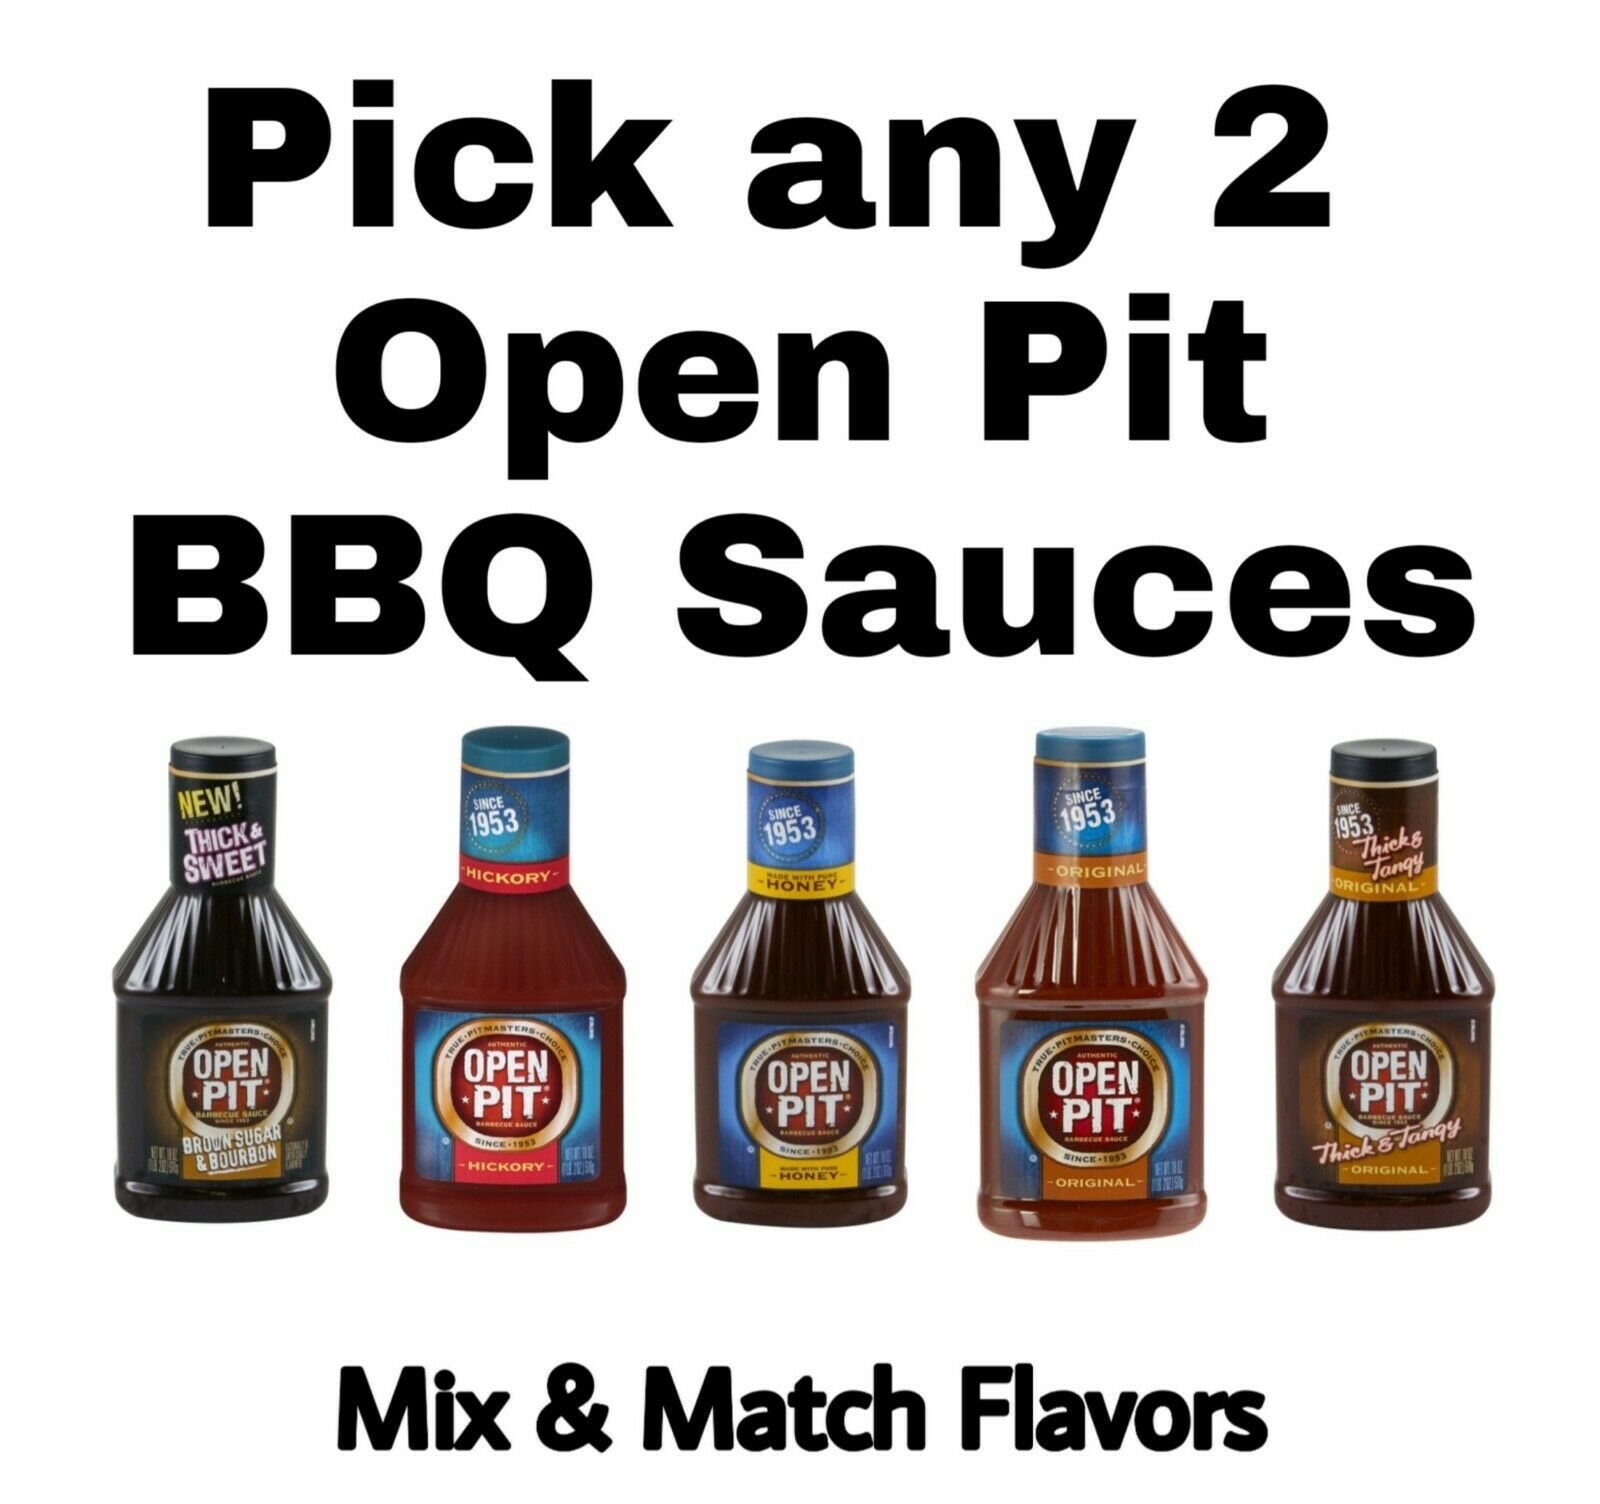 Open Pit Bbq Sauce 18 Oz Bottles Choose Any 2 Flavors Mix & Match 2 Pack